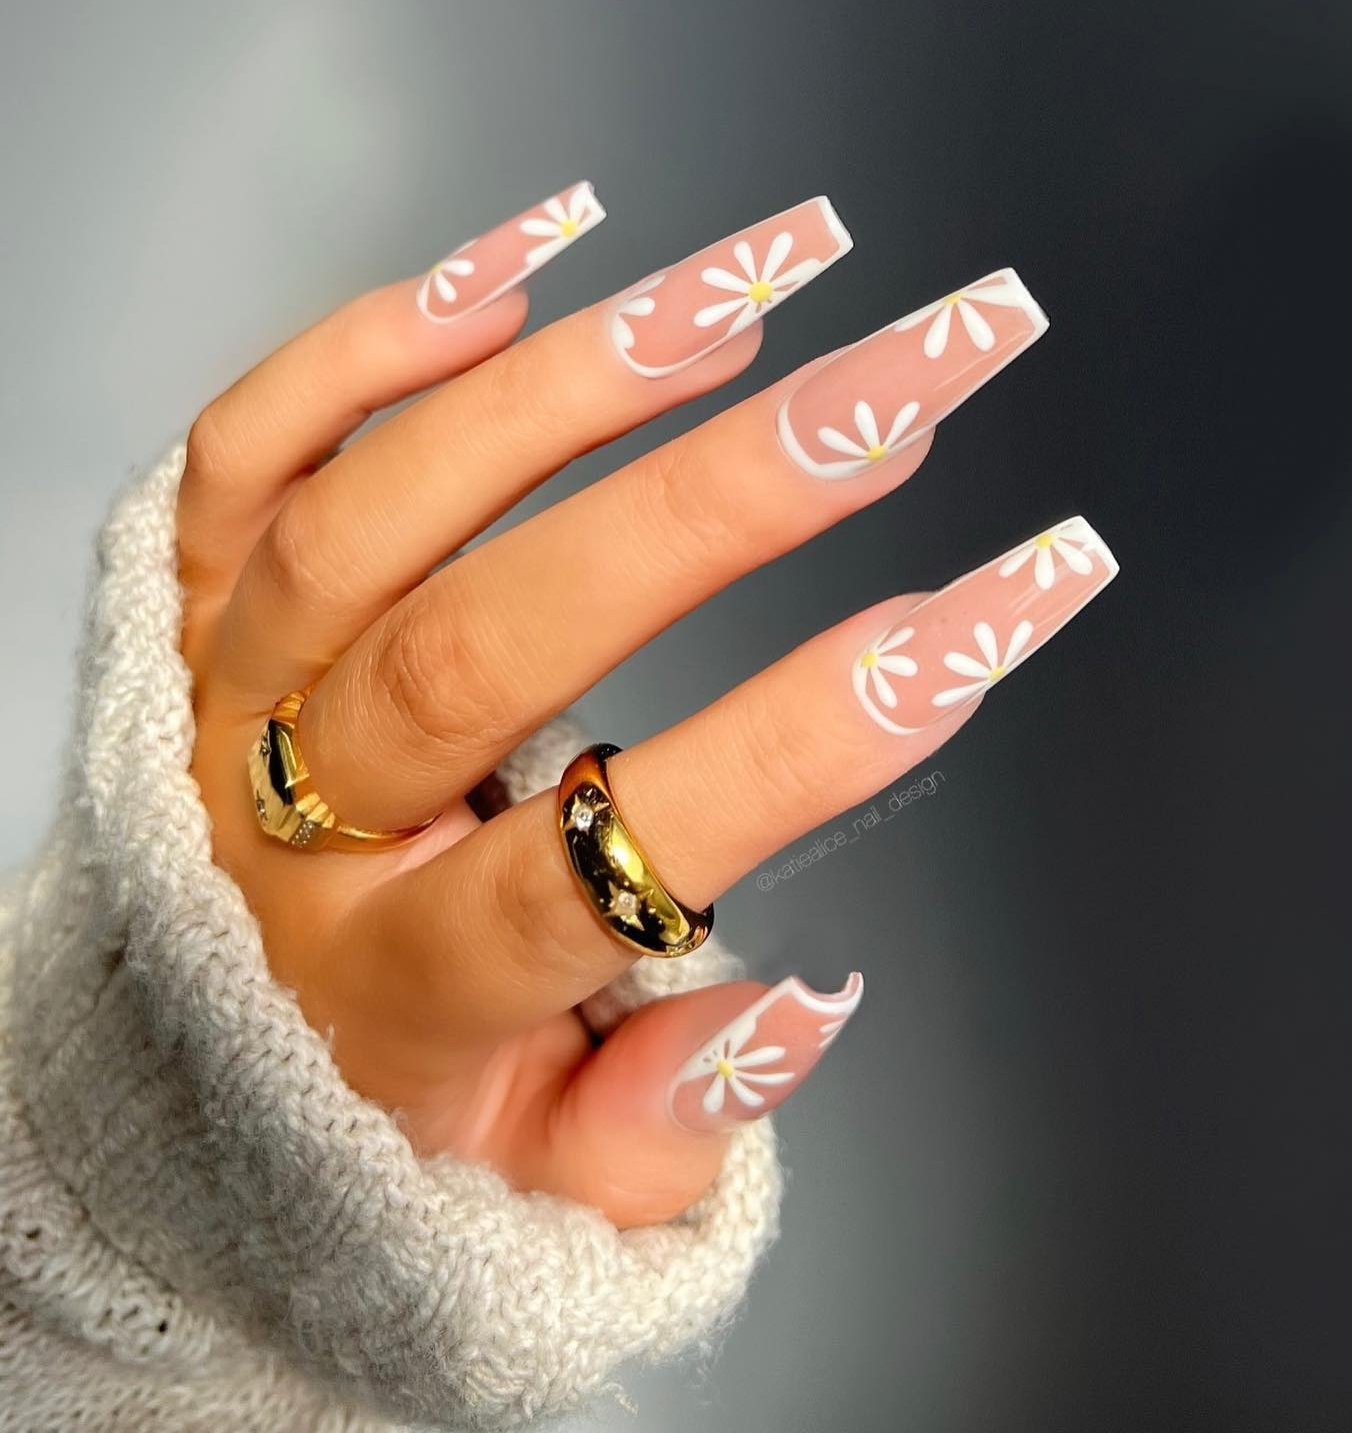 Long Coffin Nude Nails with White Flowers